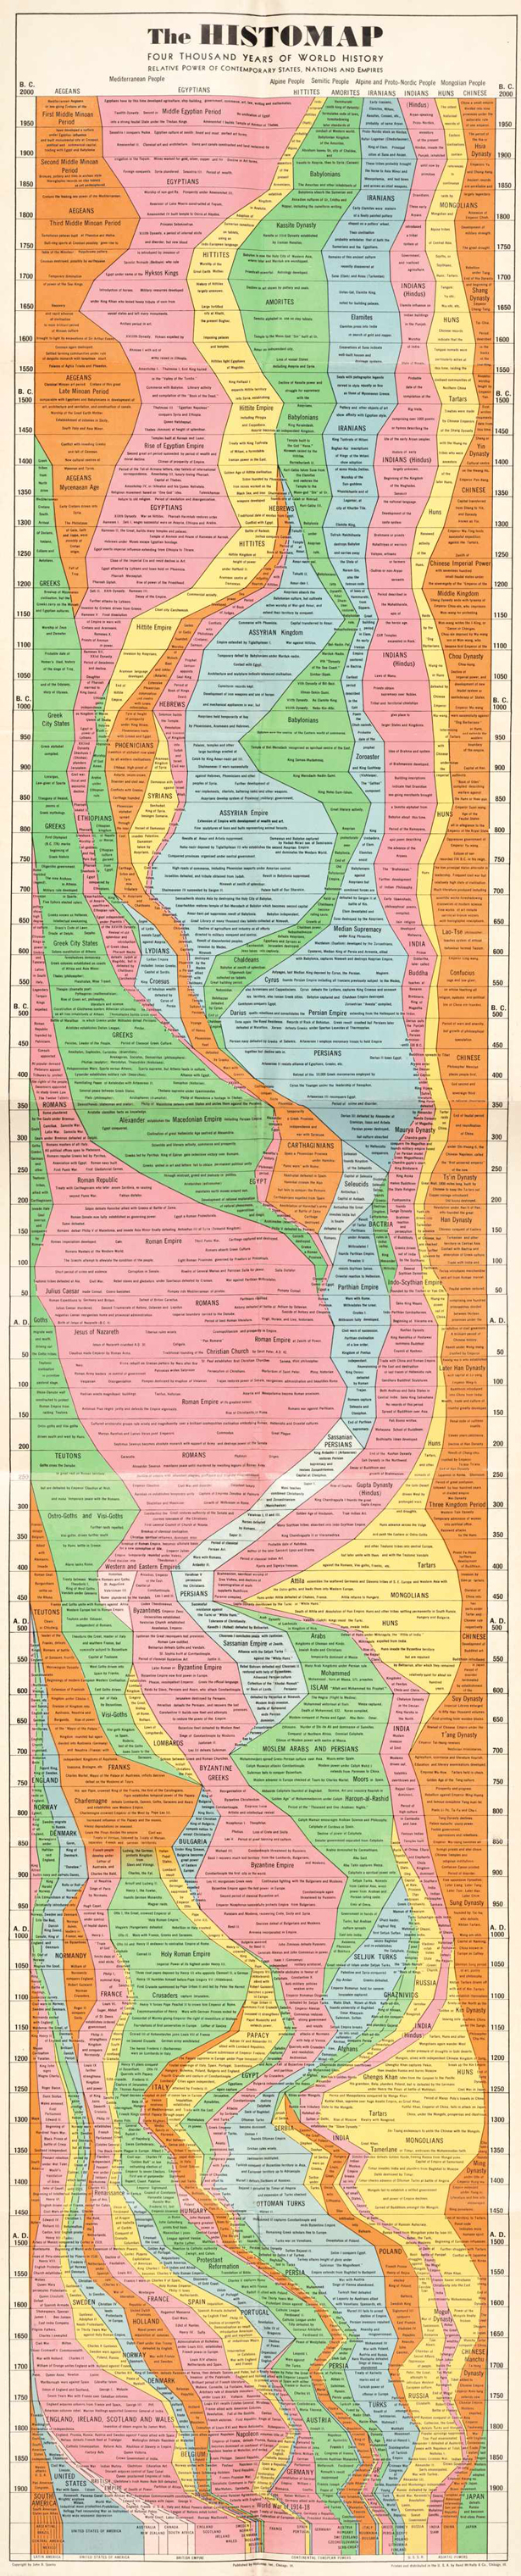 Visual Timeline of Historical Futures - The Big Picture